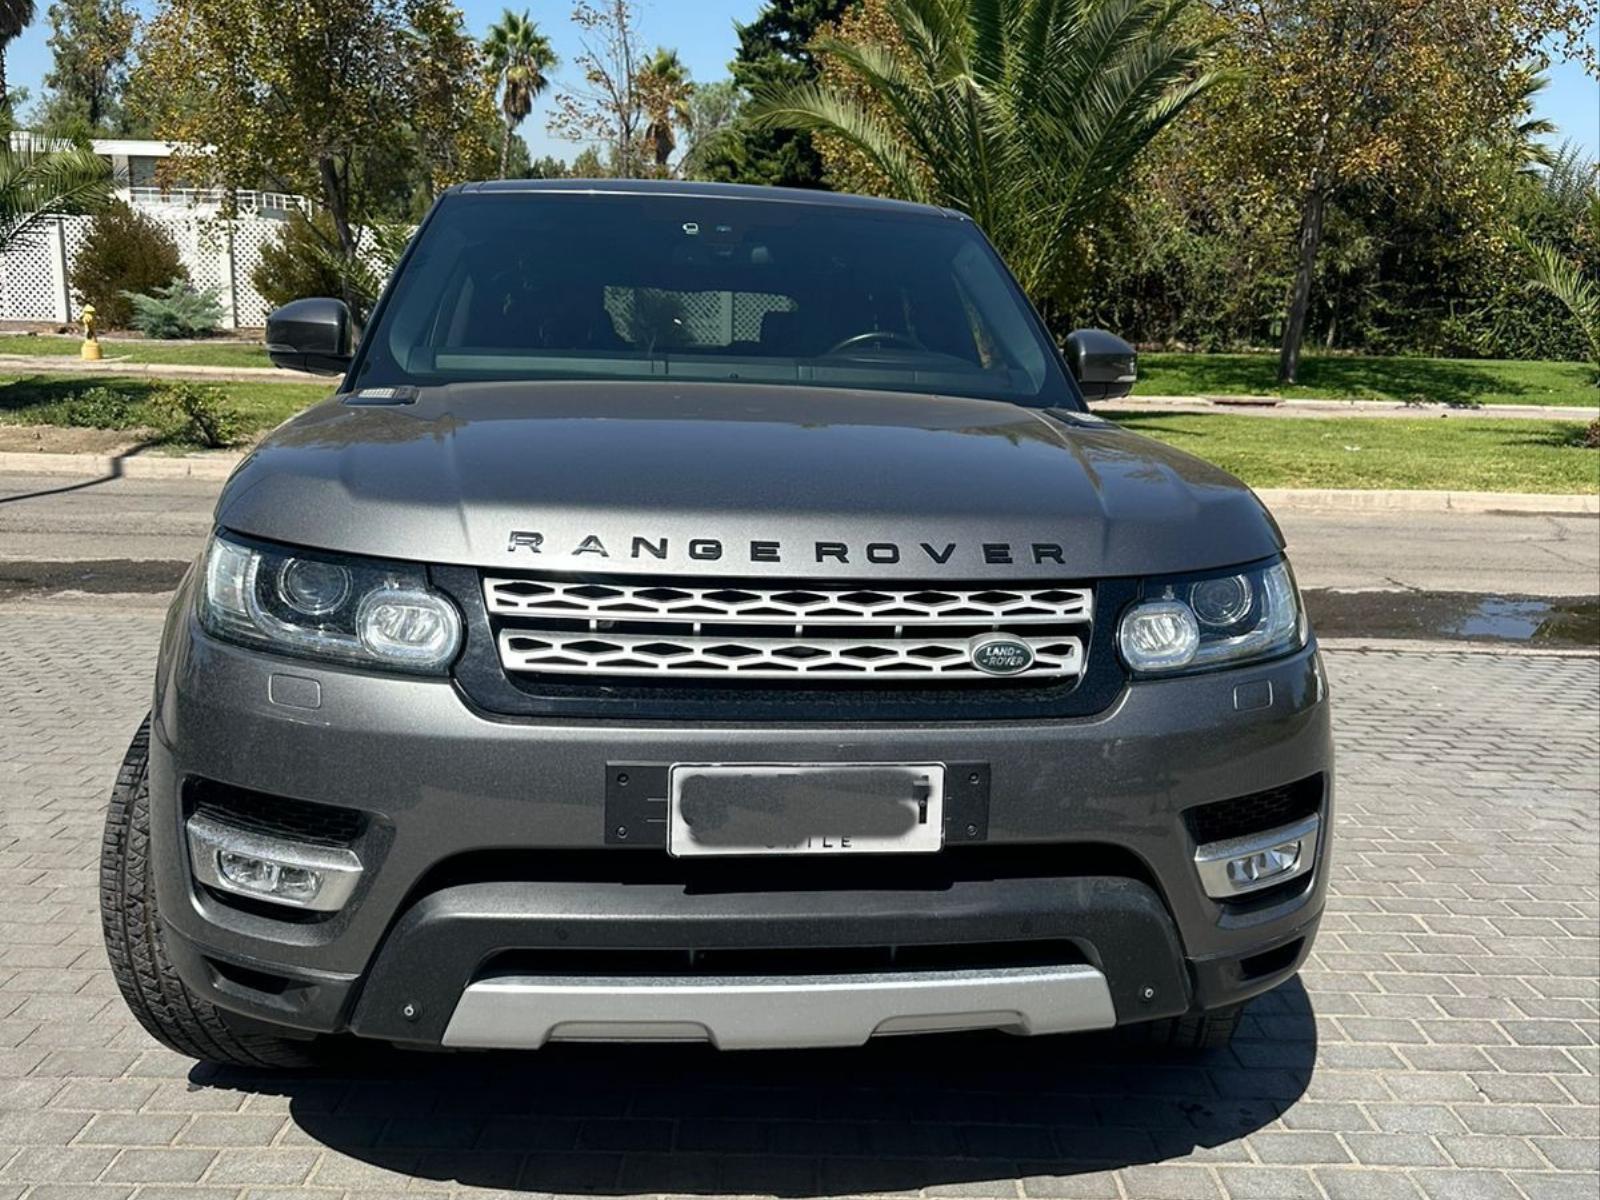 LAND ROVER RANGE ROVER SPORT 2014 5.0 SUPERCHARGED - FULL MOTOR